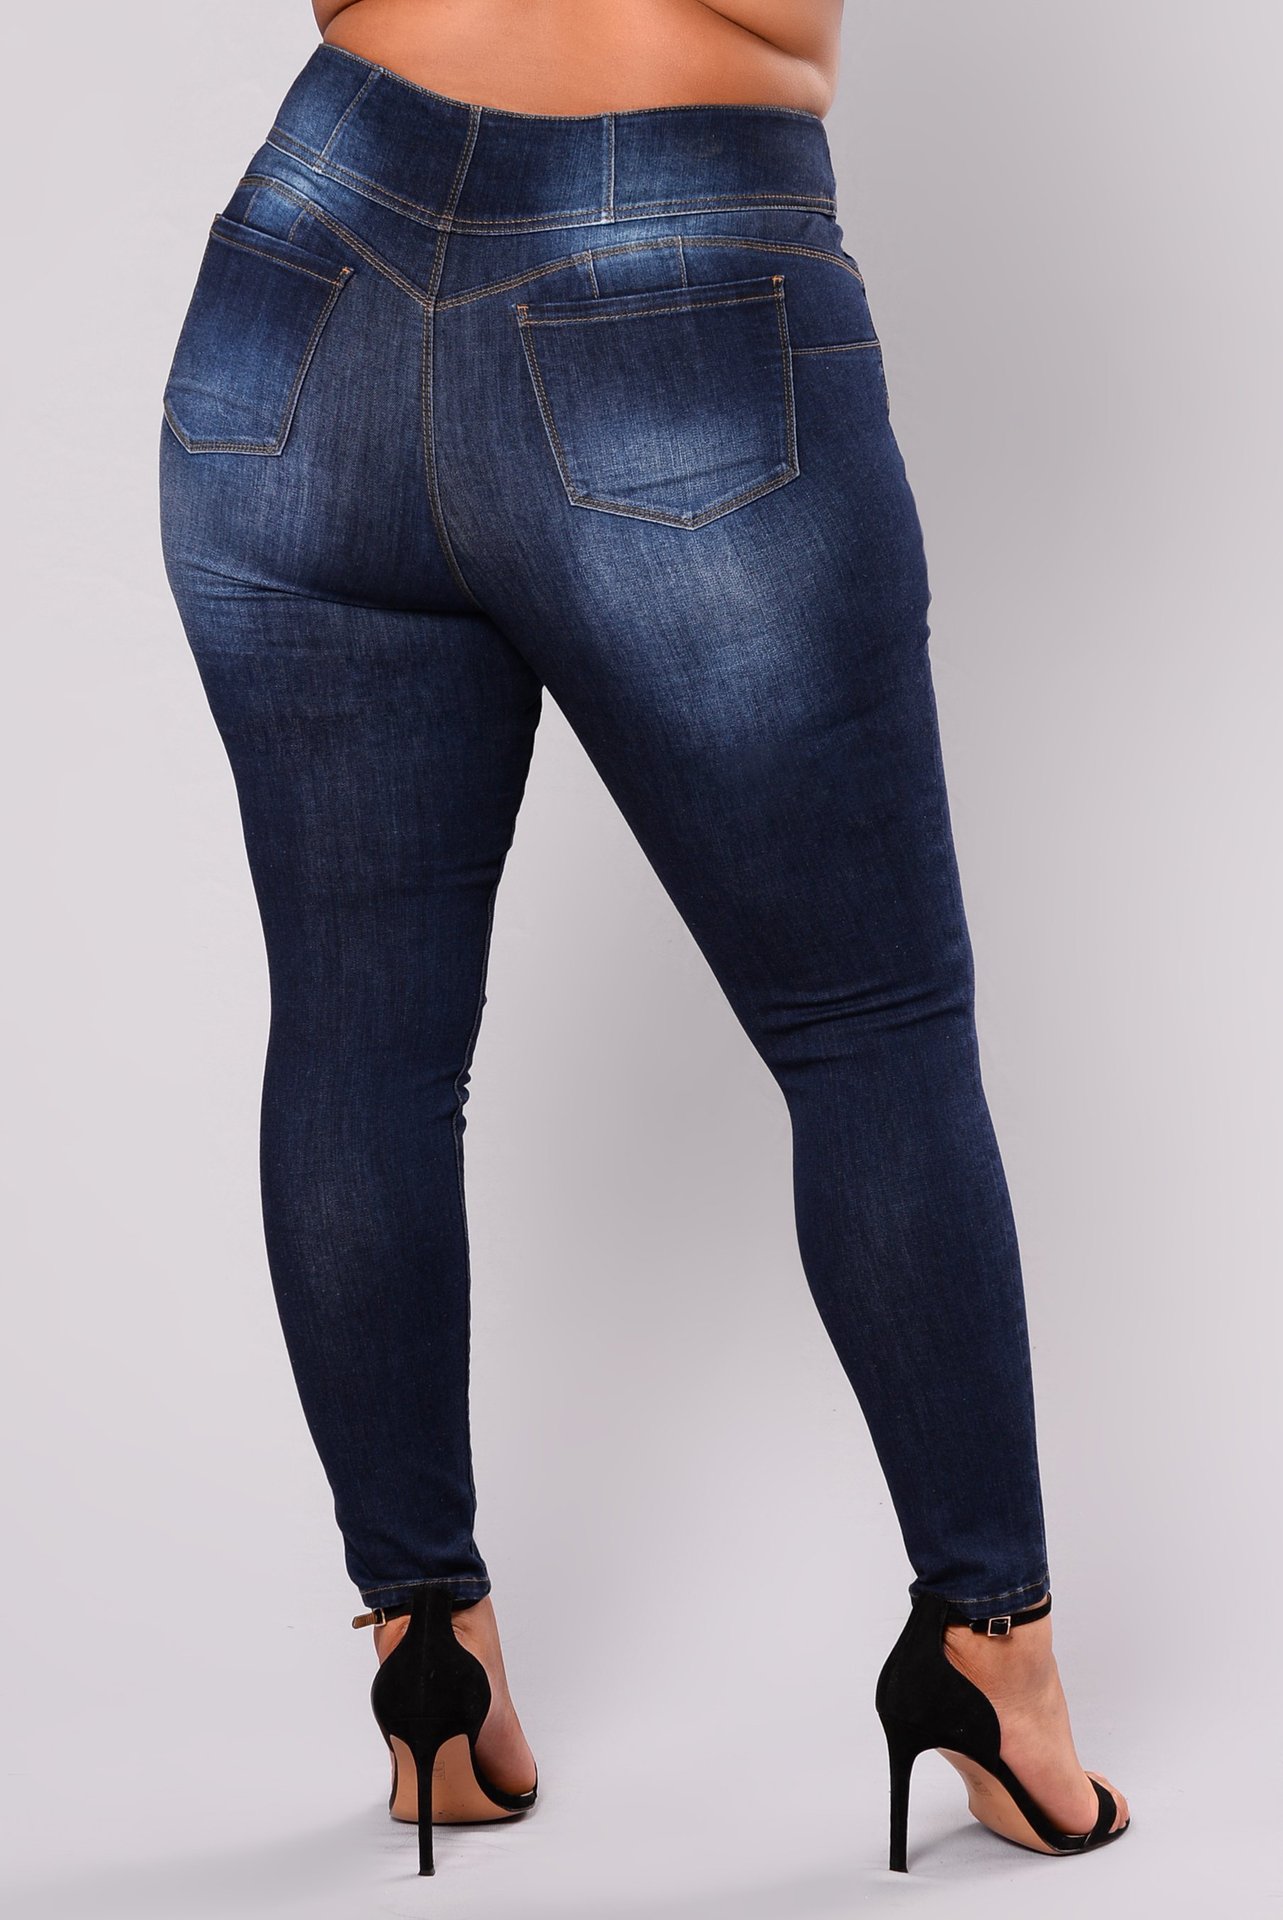 plus size high waist breasted slim jeans NSXXL128253